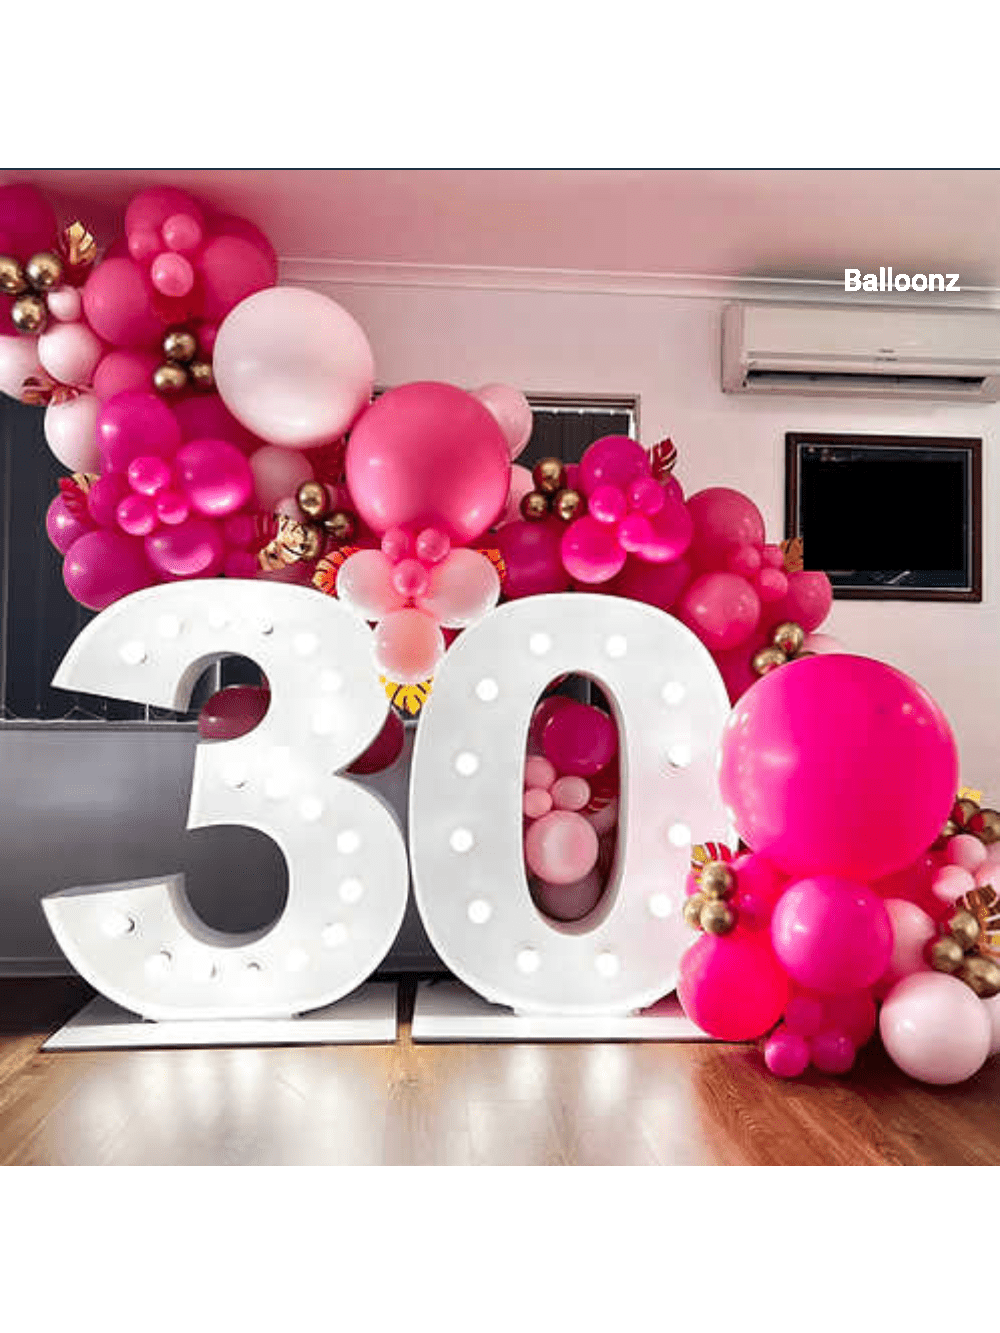 30th Light up number hire and balloons package  Balloonz   